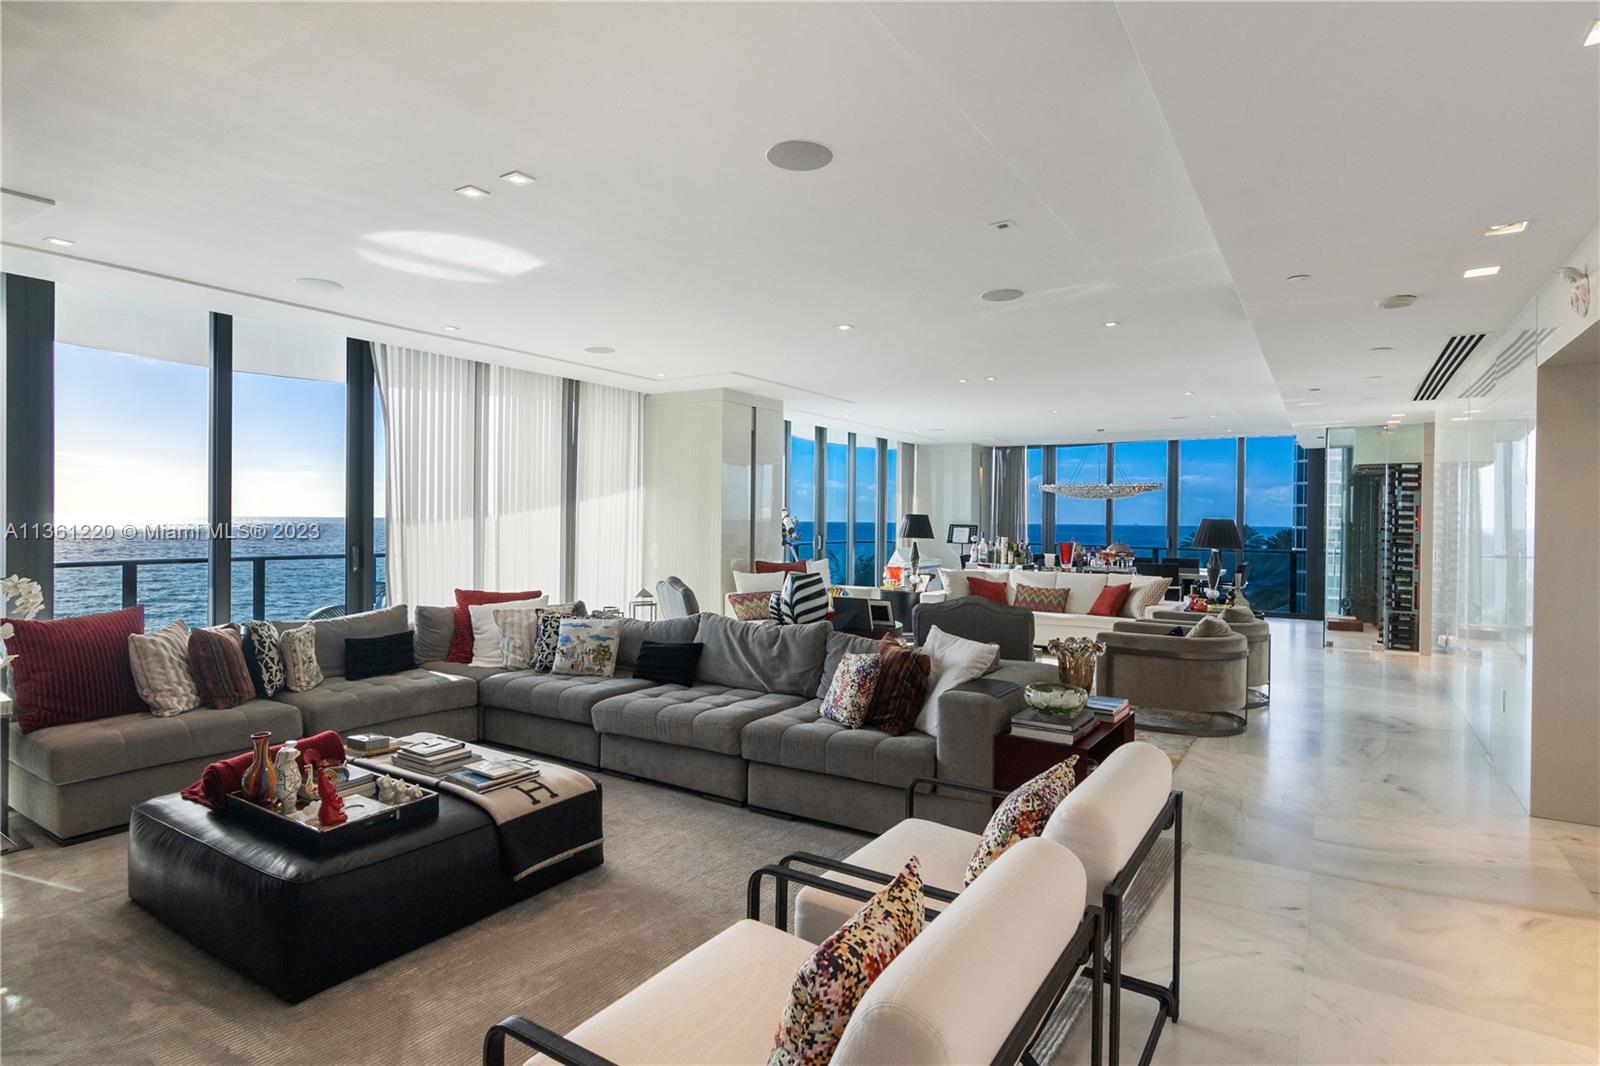 Property for Sale at 19575 Collins Ave 5, Sunny Isles Beach, Miami-Dade County, Florida - Bedrooms: 4 
Bathrooms: 6  - $9,984,000